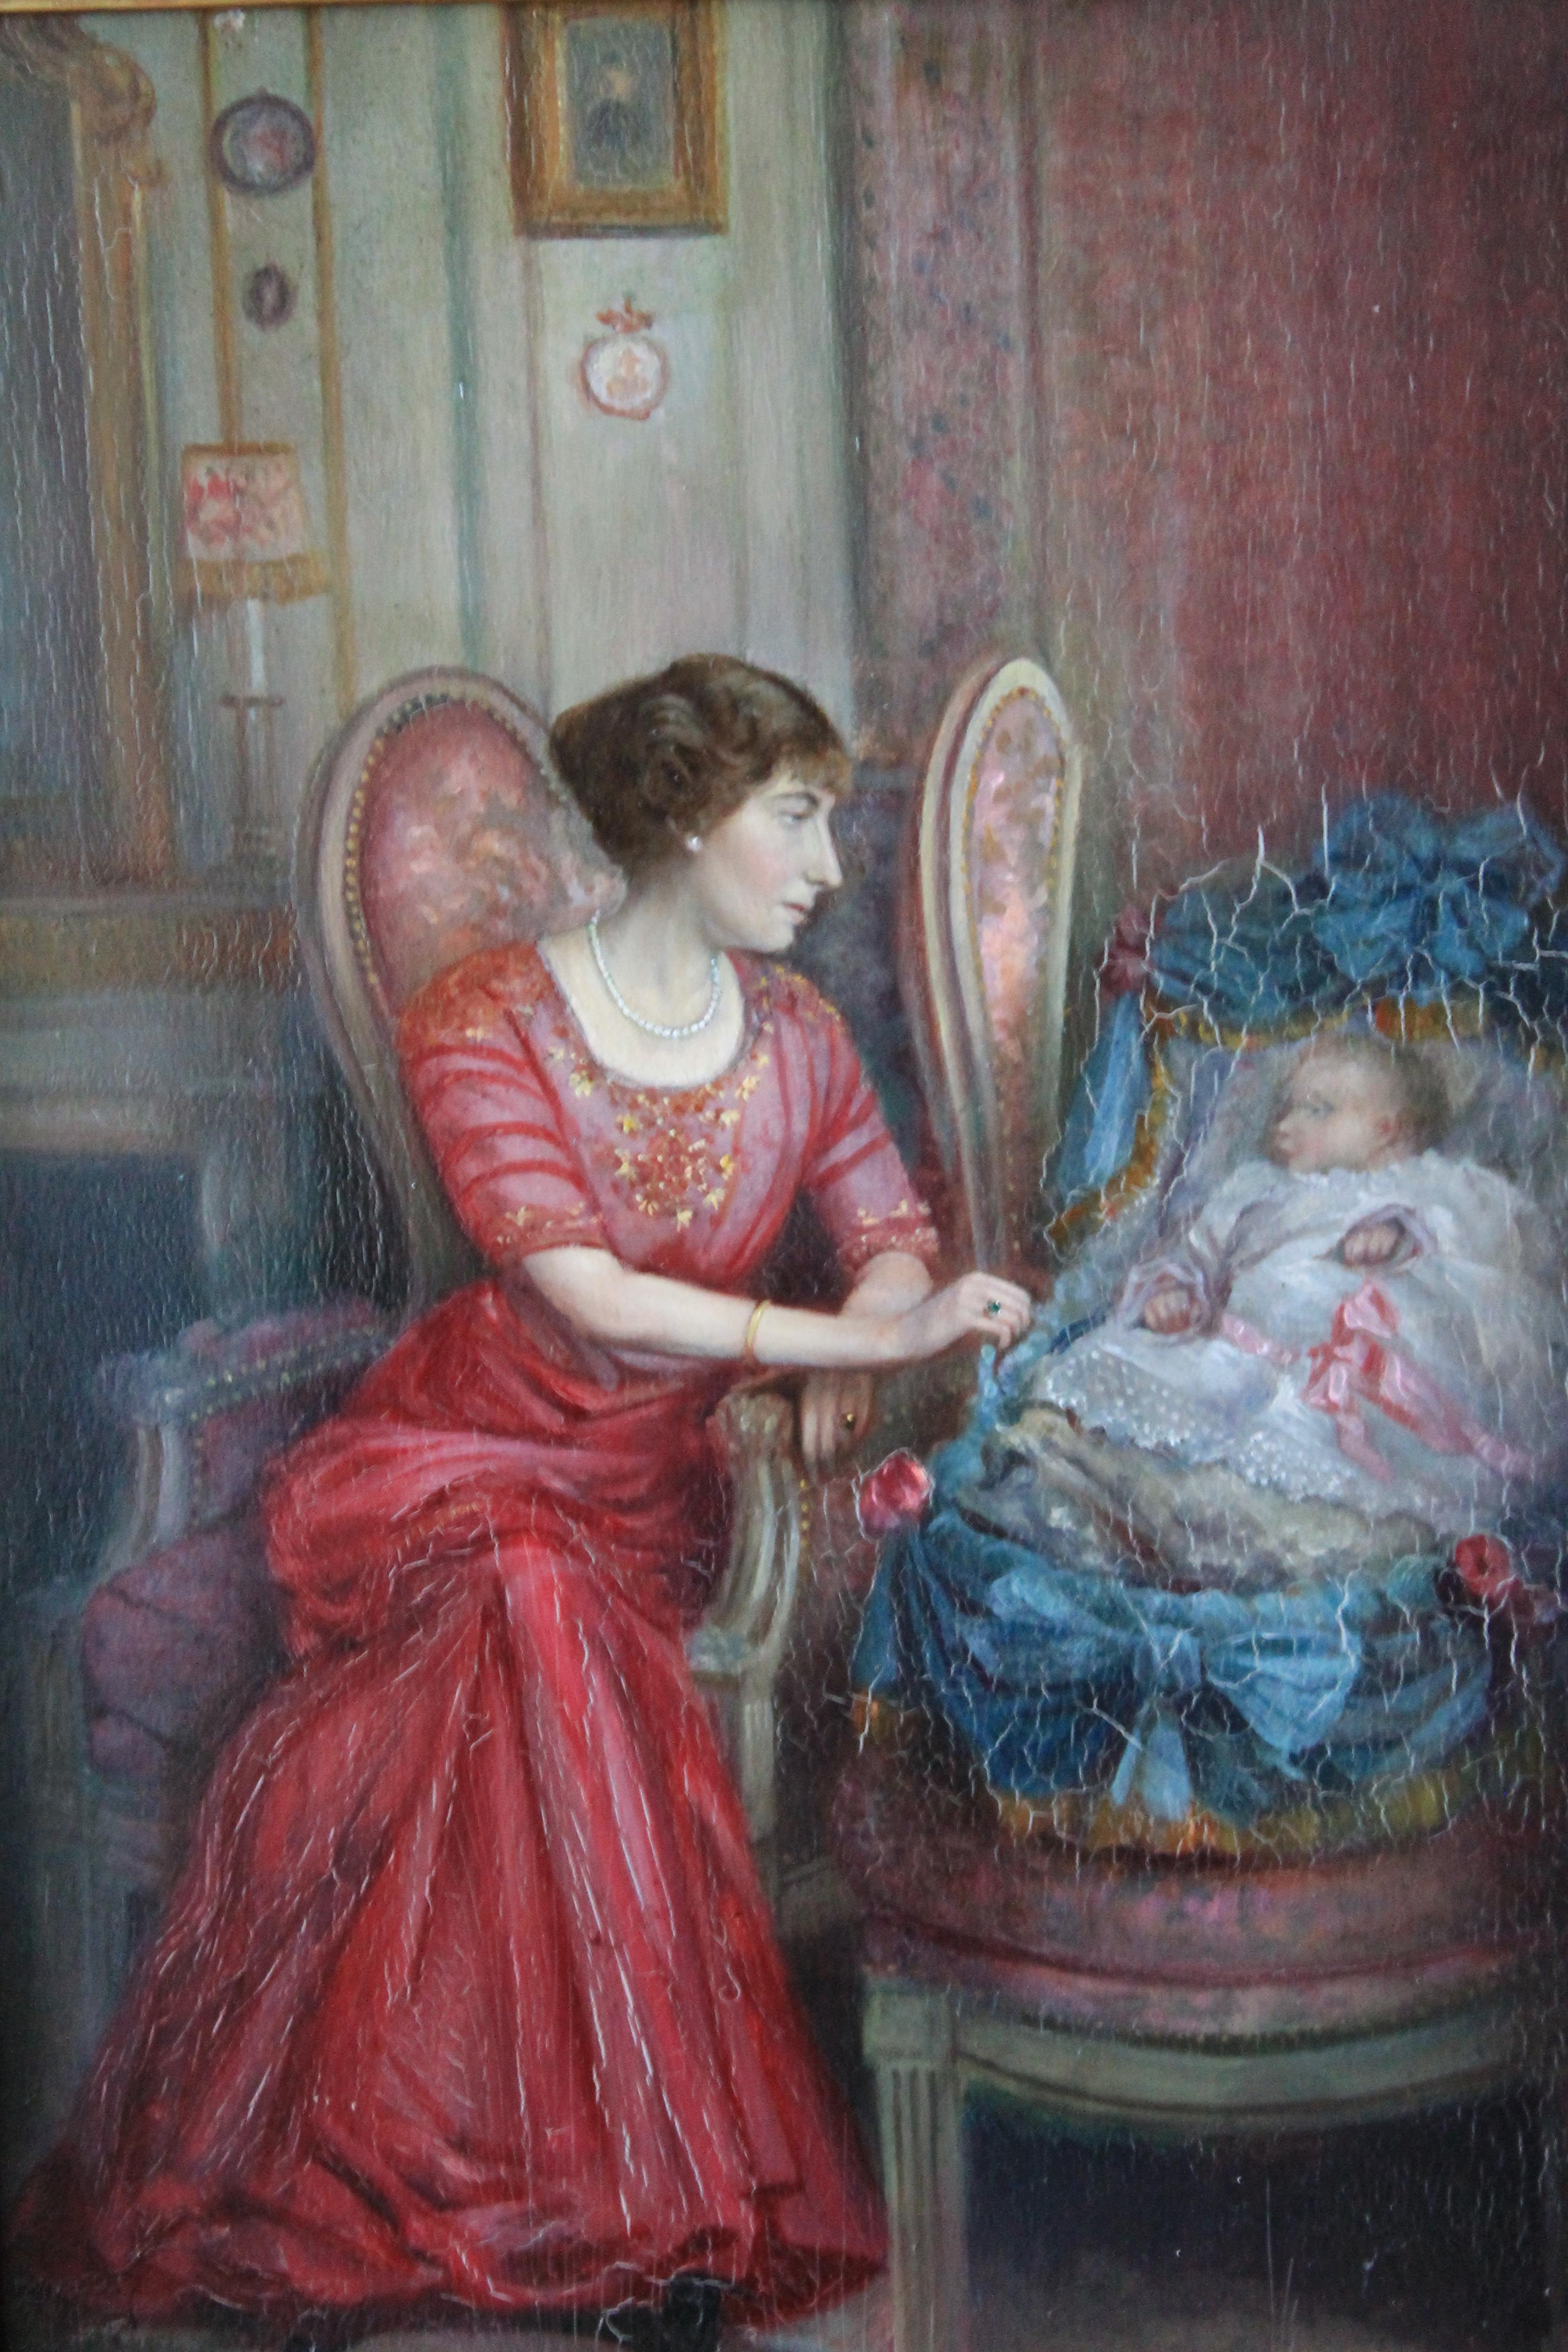 Unknown Interior Painting - Interior oil painting of a mother and child, Antique Art Deco interior painting